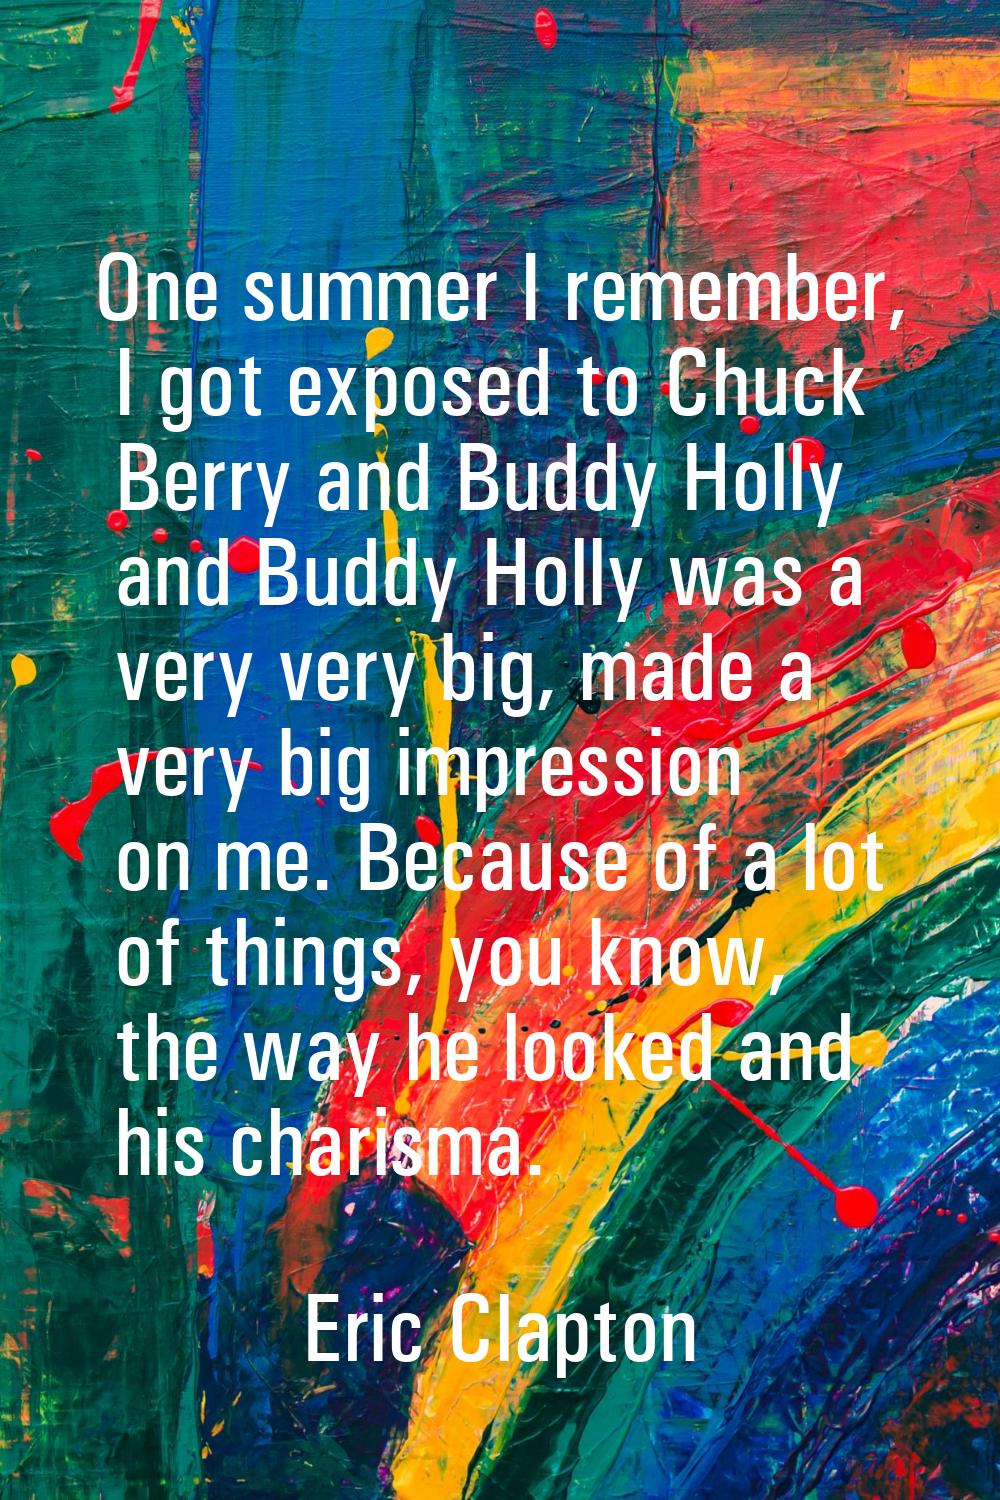 One summer I remember, I got exposed to Chuck Berry and Buddy Holly and Buddy Holly was a very very